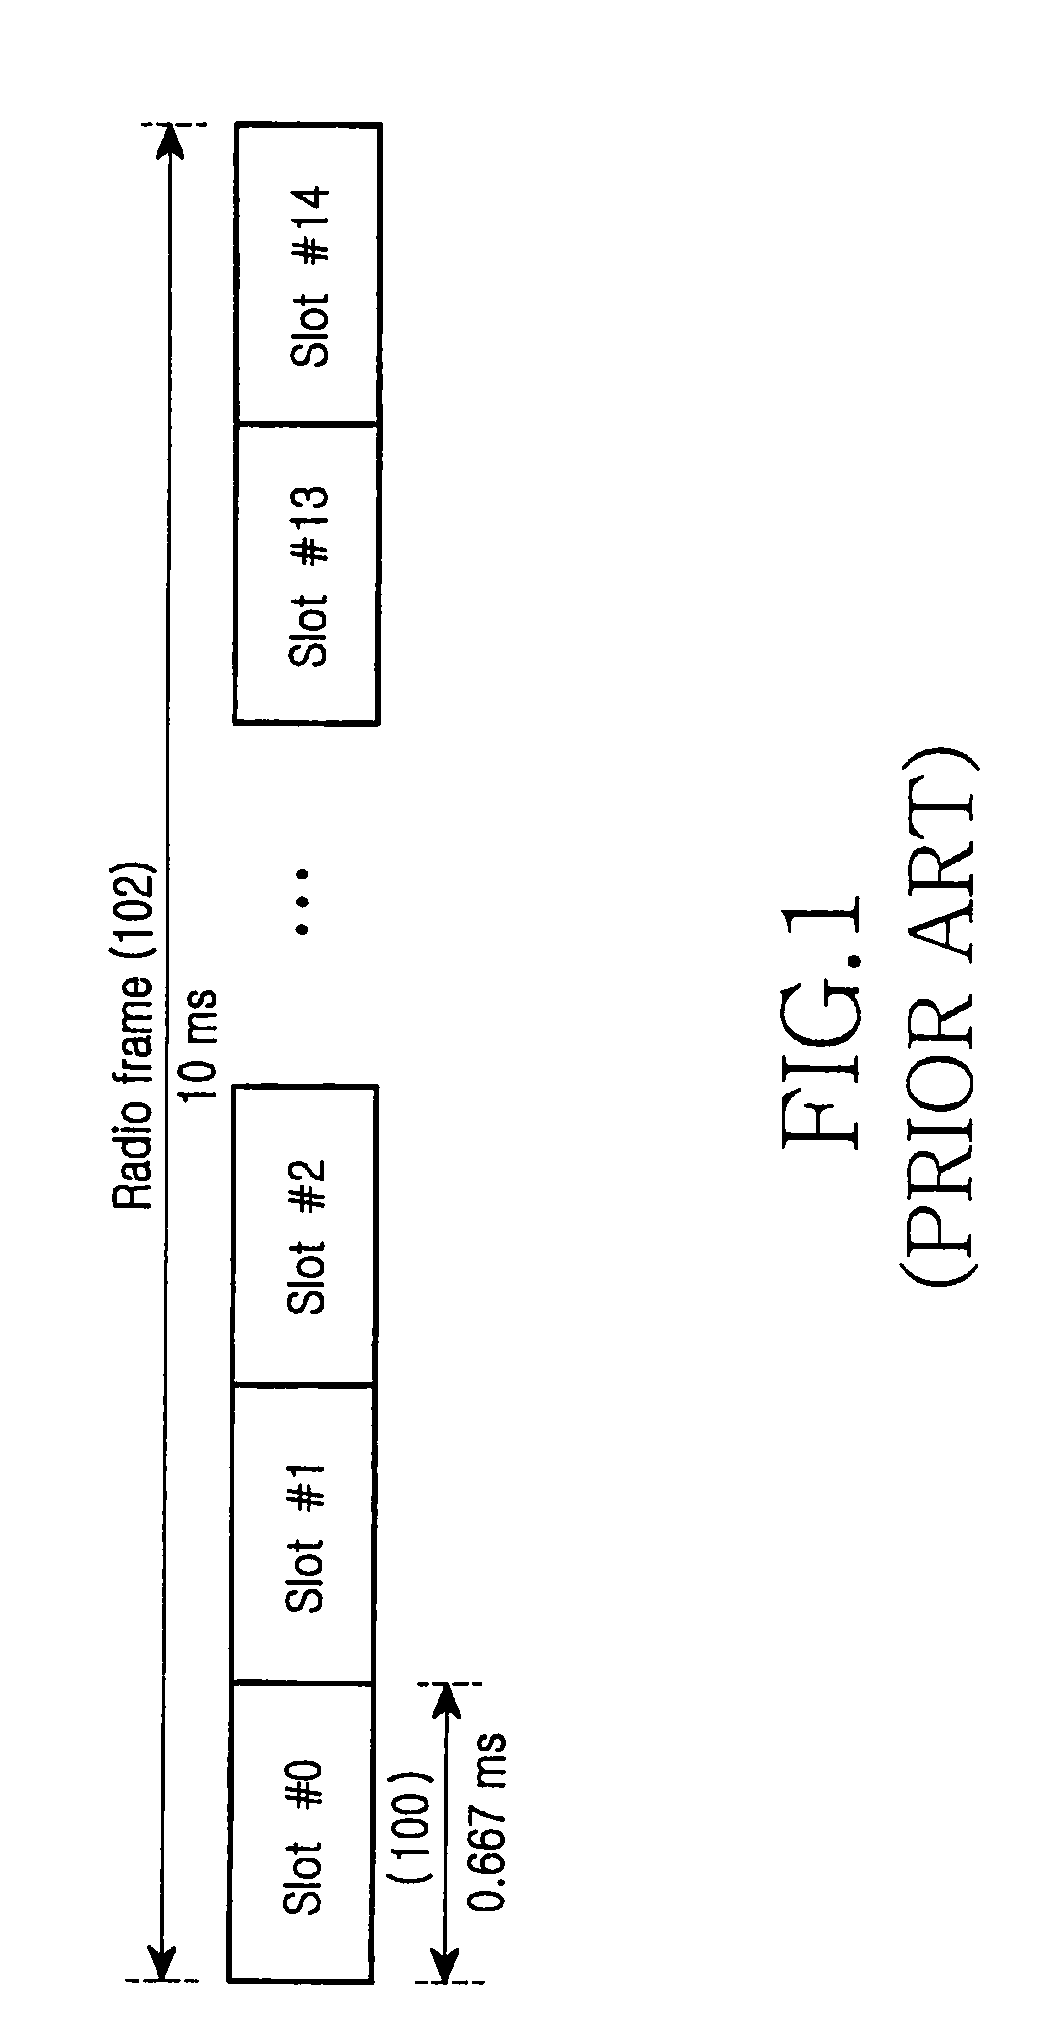 Method and apparatus for transmitting synchronization signals in an OFDM based cellular communication system